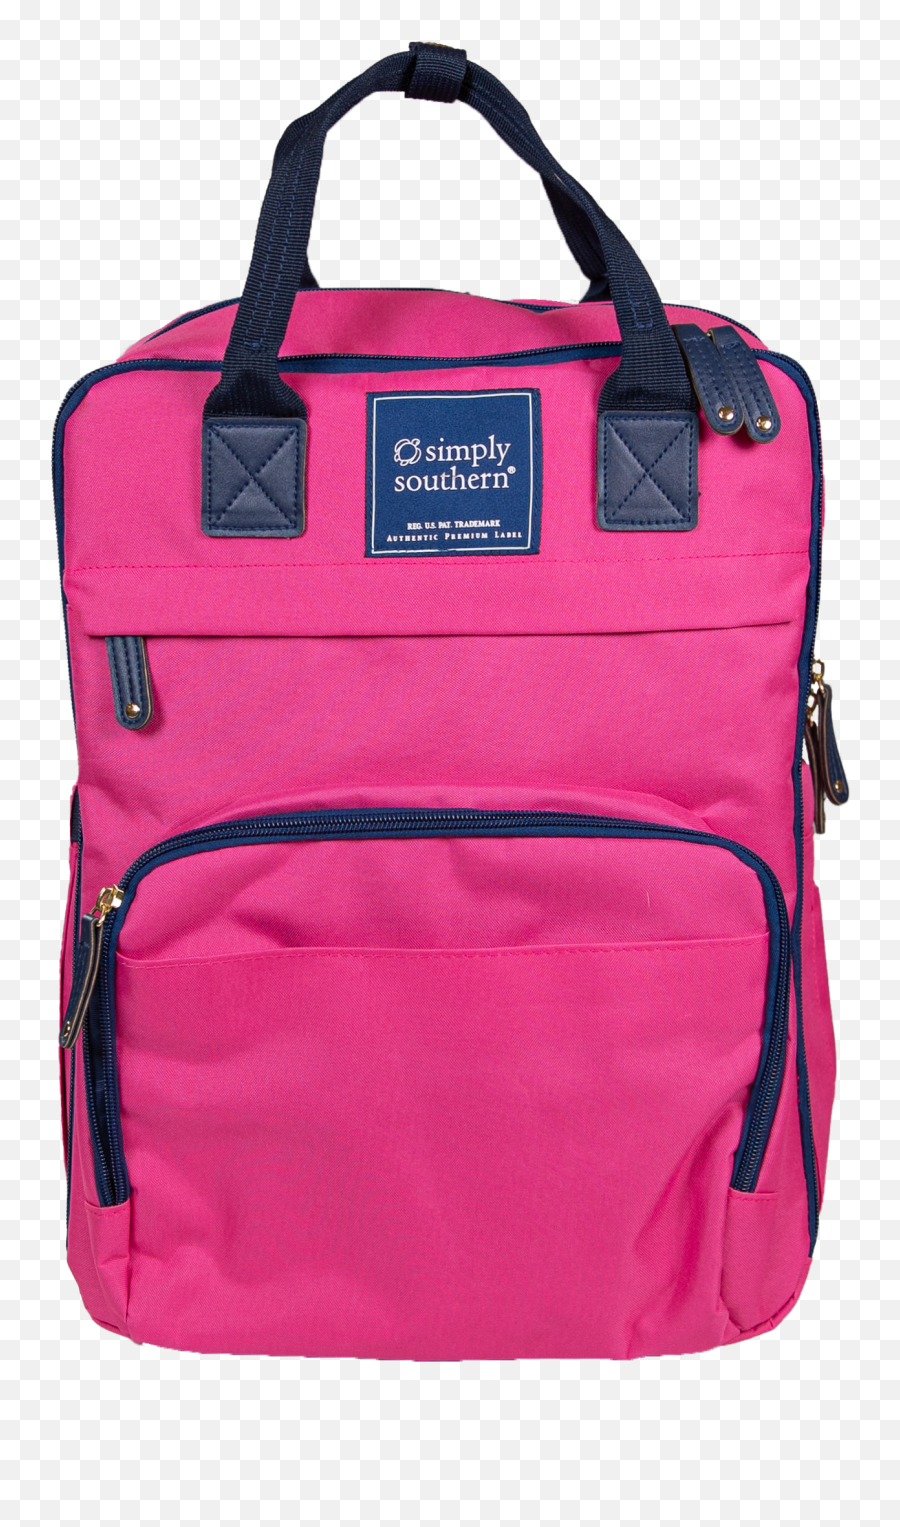 Signature Simply Southern Backpack - Solid Emoji,Simply Southern Logo